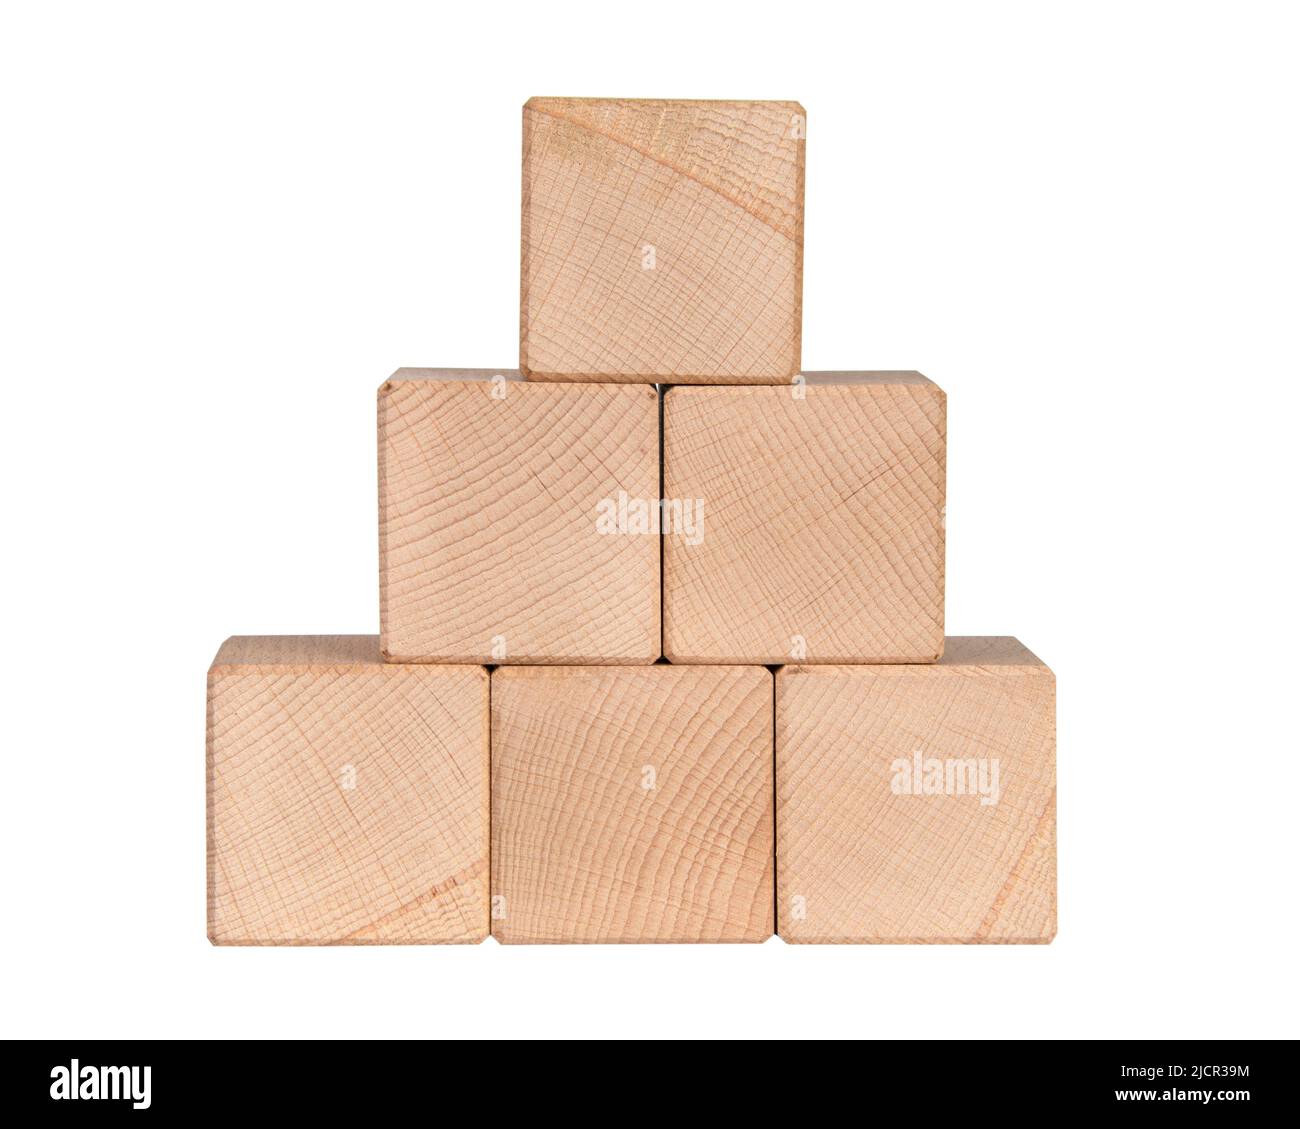 Wooden cubes brick construction for creative text isolated on the white background Stock Photo